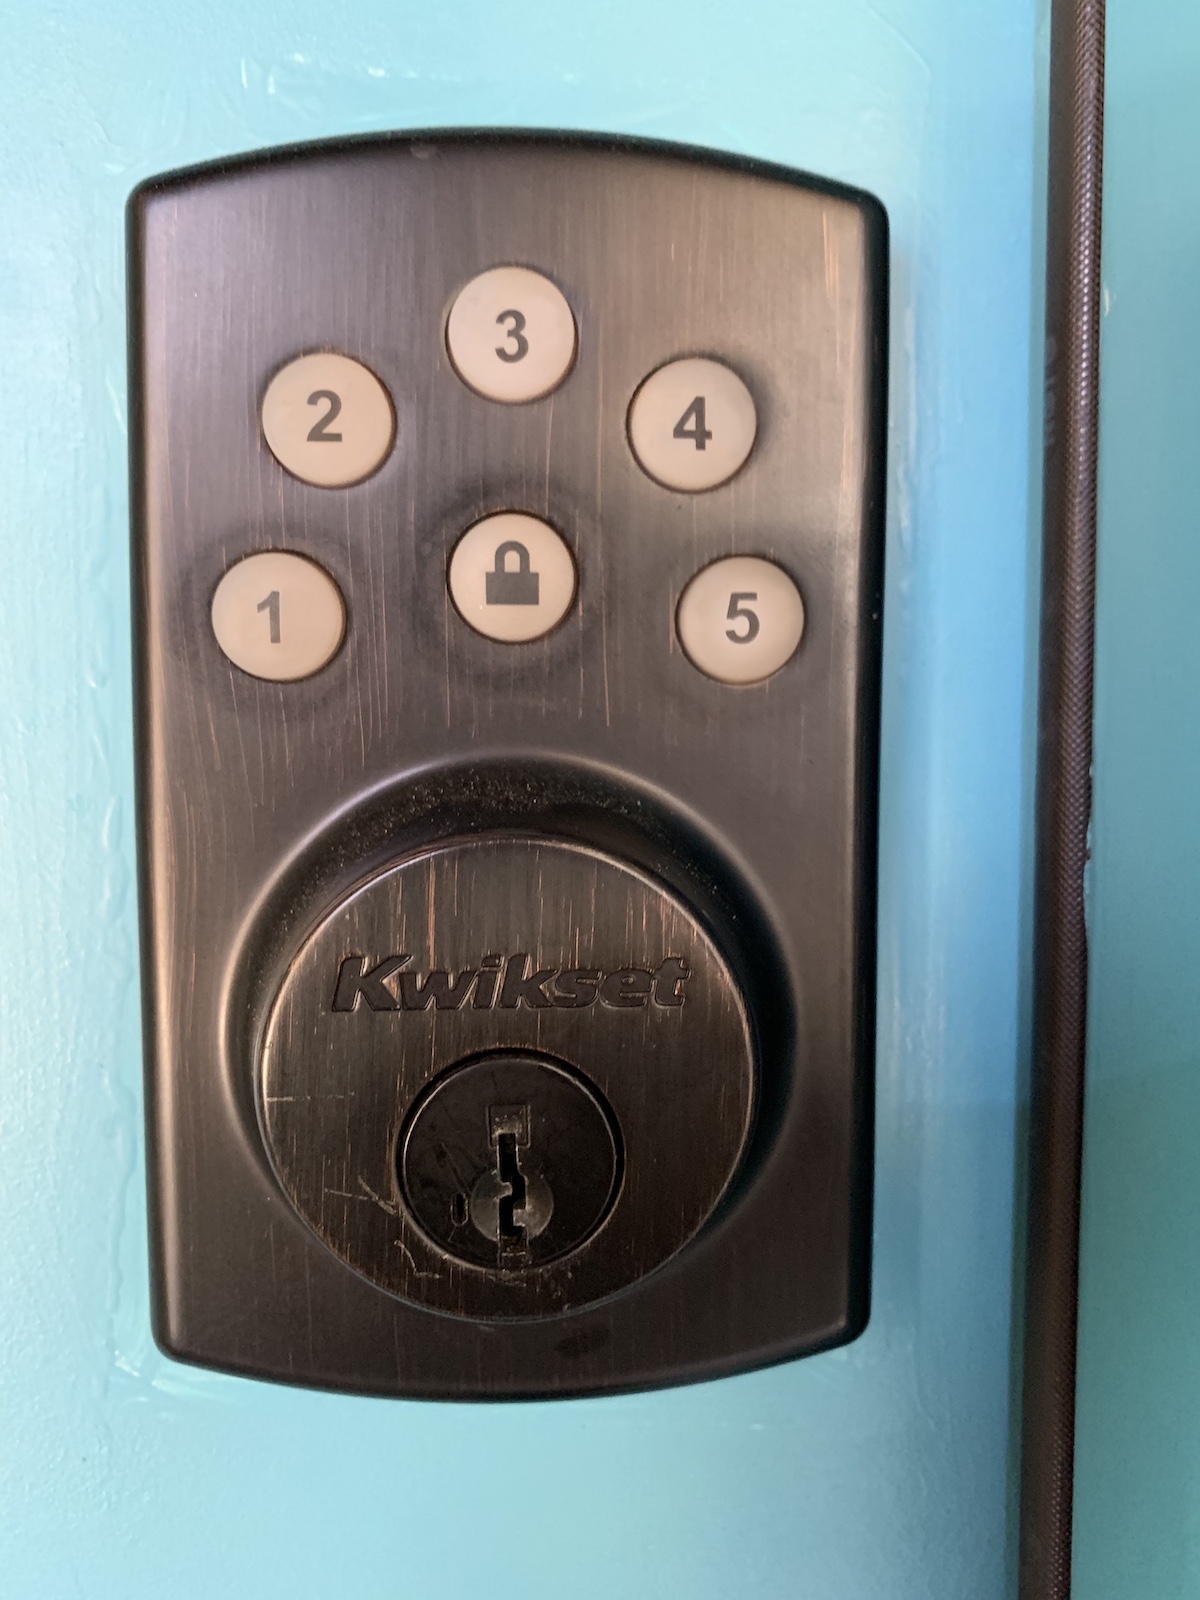 Photo of a keypad-controlled door lock that has five keys labeled 1/2 3/4 5/6 7/8 9/0 and another key having a lock icon.